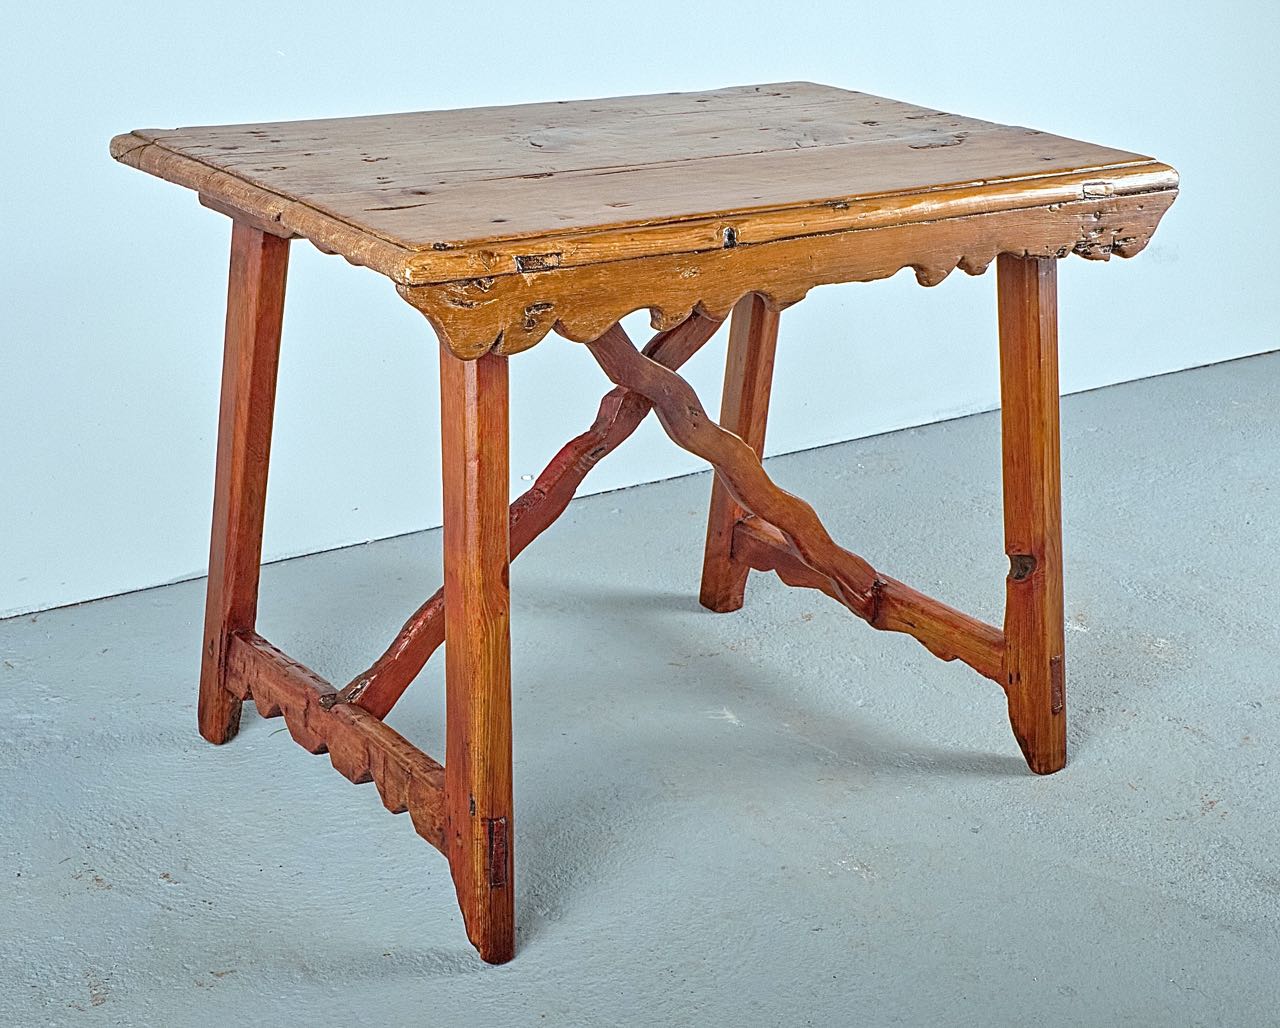 Antique trestle leg scalloped skirt table with wooden stretchers, pine